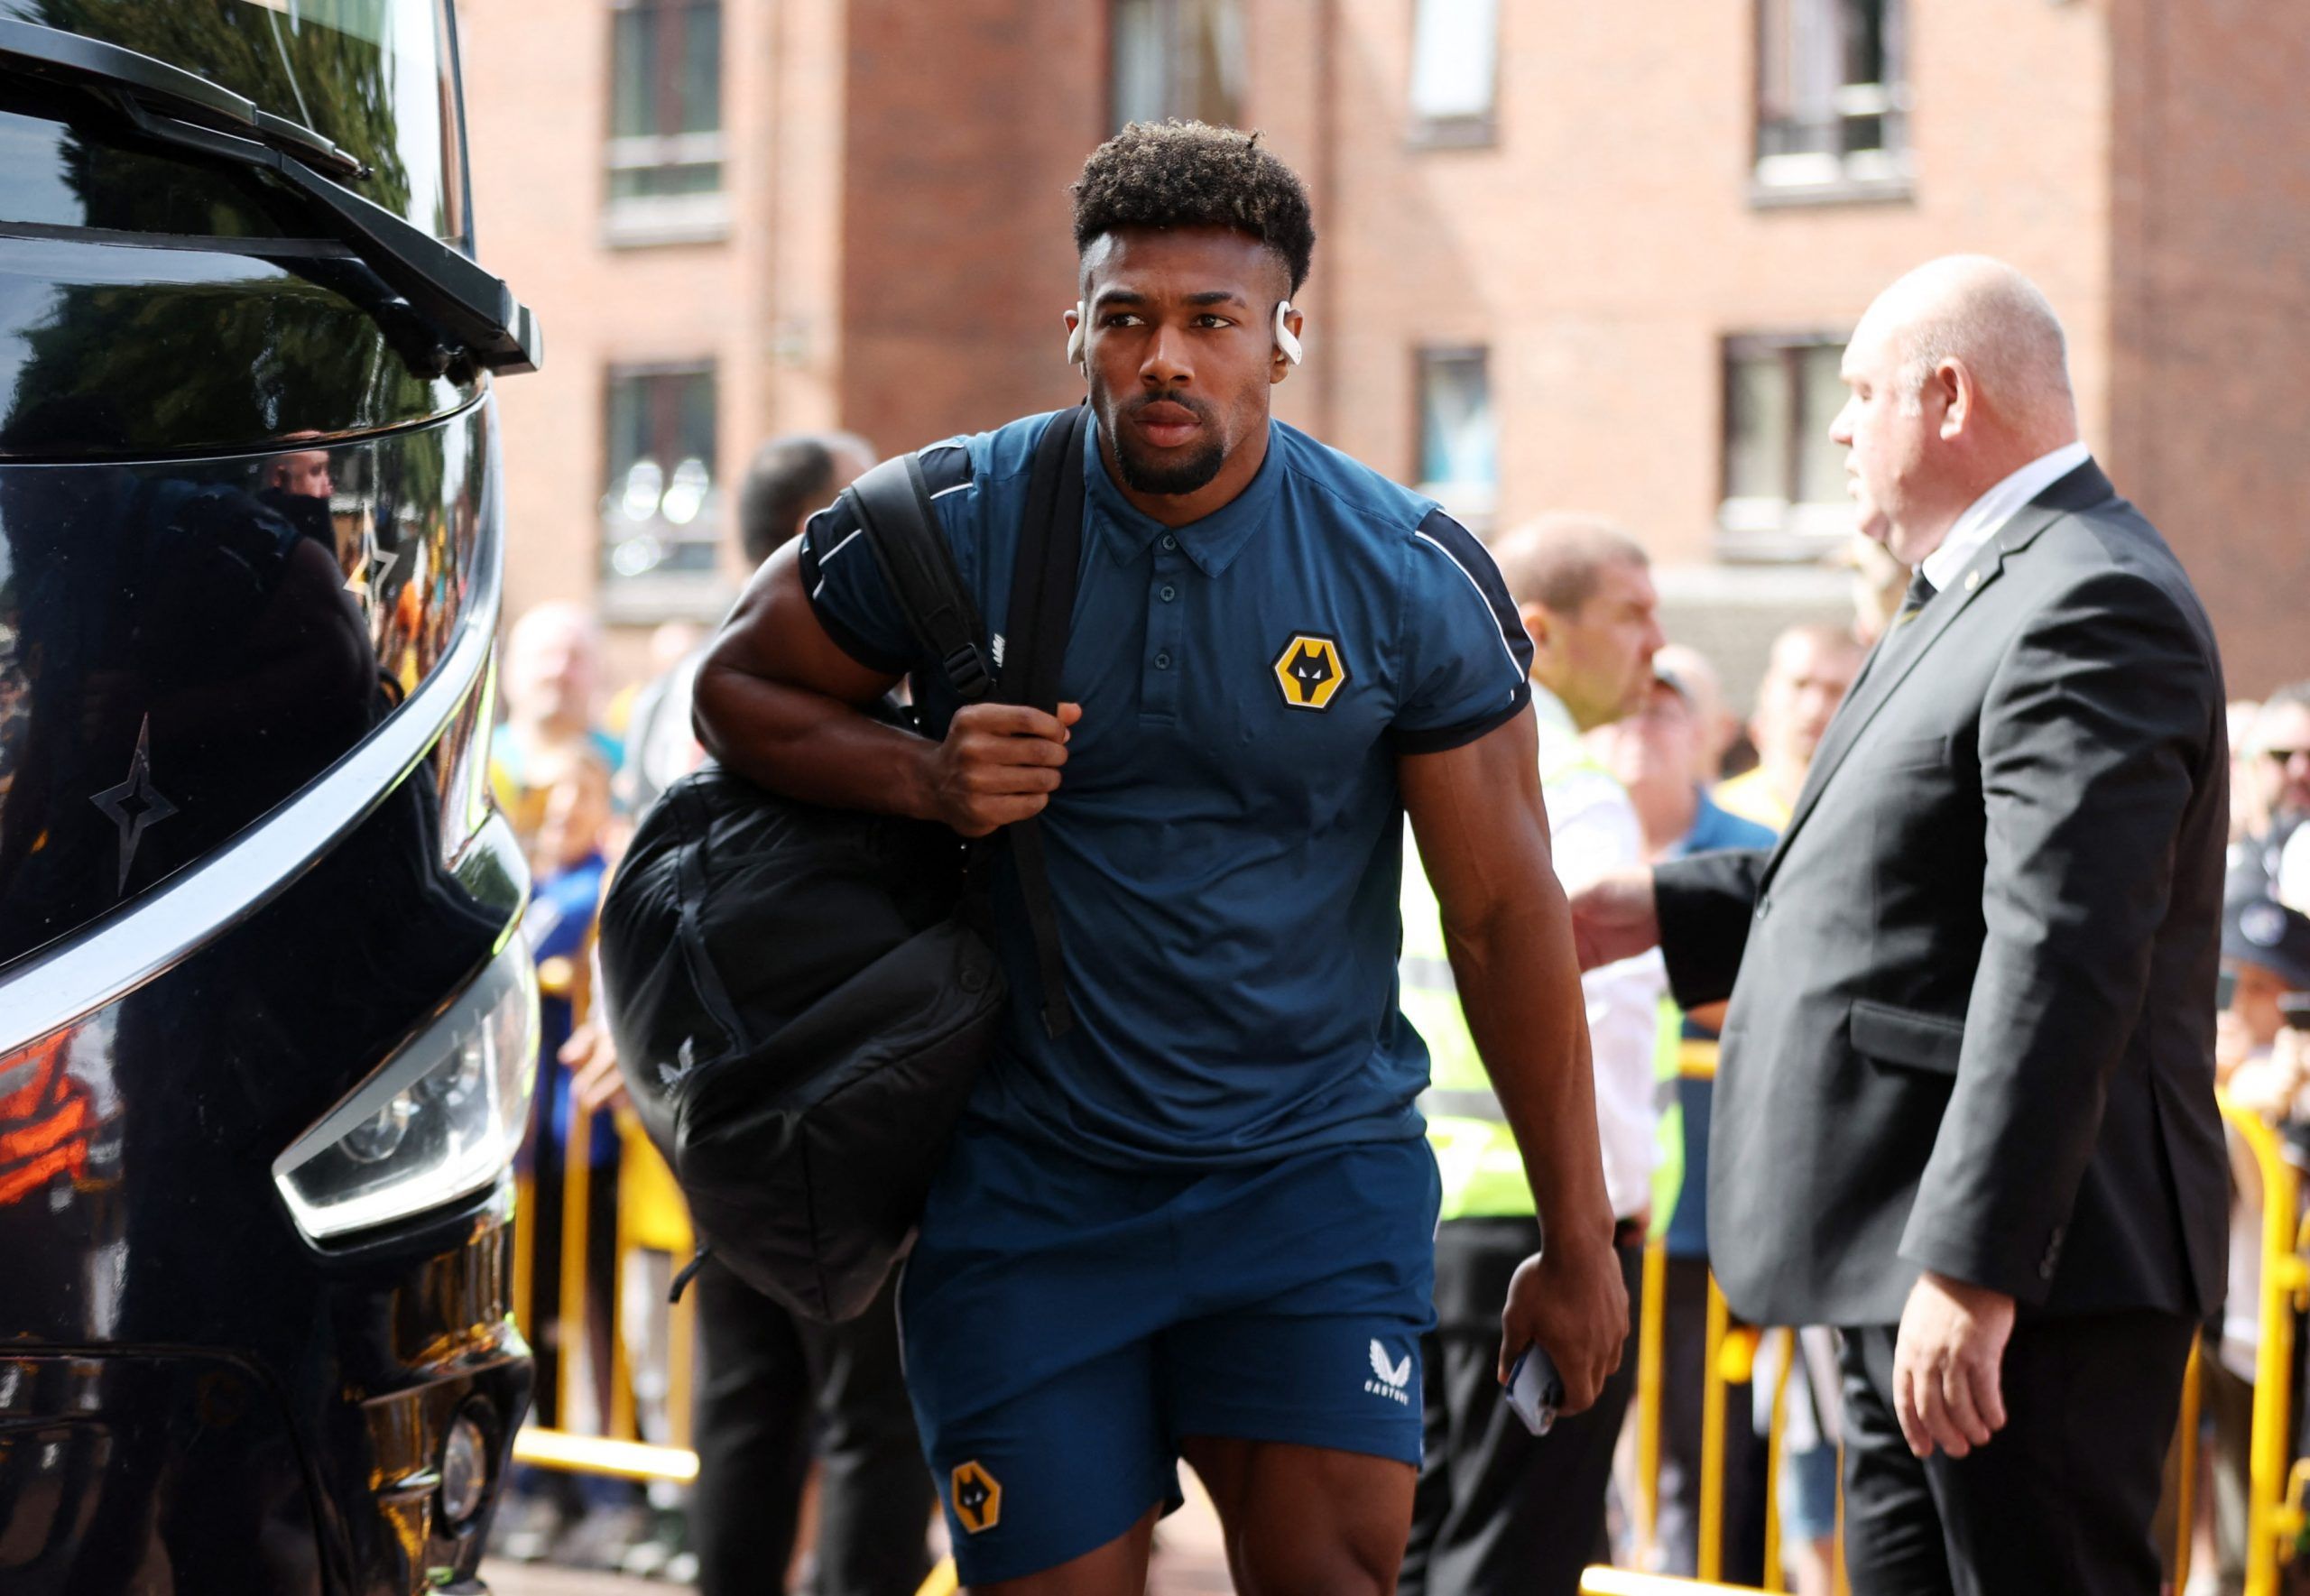 Leeds: Kevin Campbell reacts to continued Adama Traore links -Leeds United News